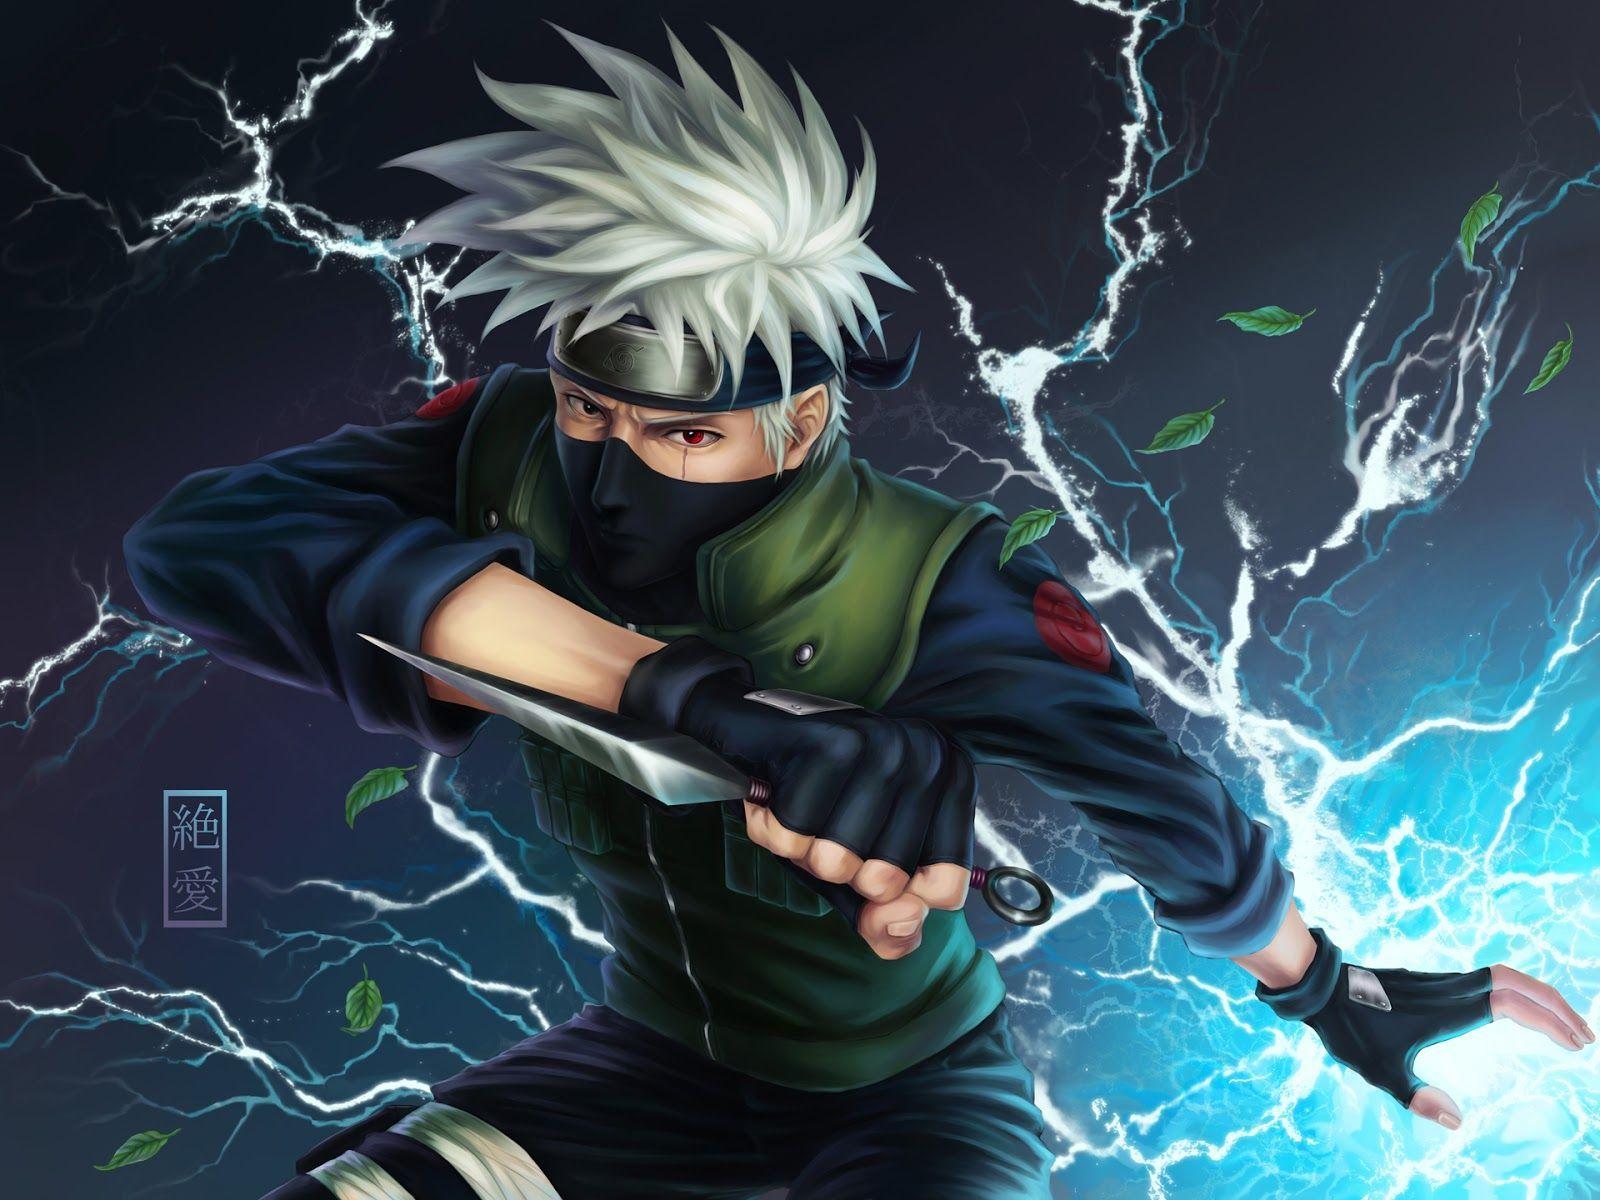 Kakashi Sharingan Wallpapers Wallpaper Cave We hope you enjoy our growing collection of hd images to use as a background or please contact us if you want to publish a kakashi mangekyou sharingan wallpaper on our site. kakashi sharingan wallpapers